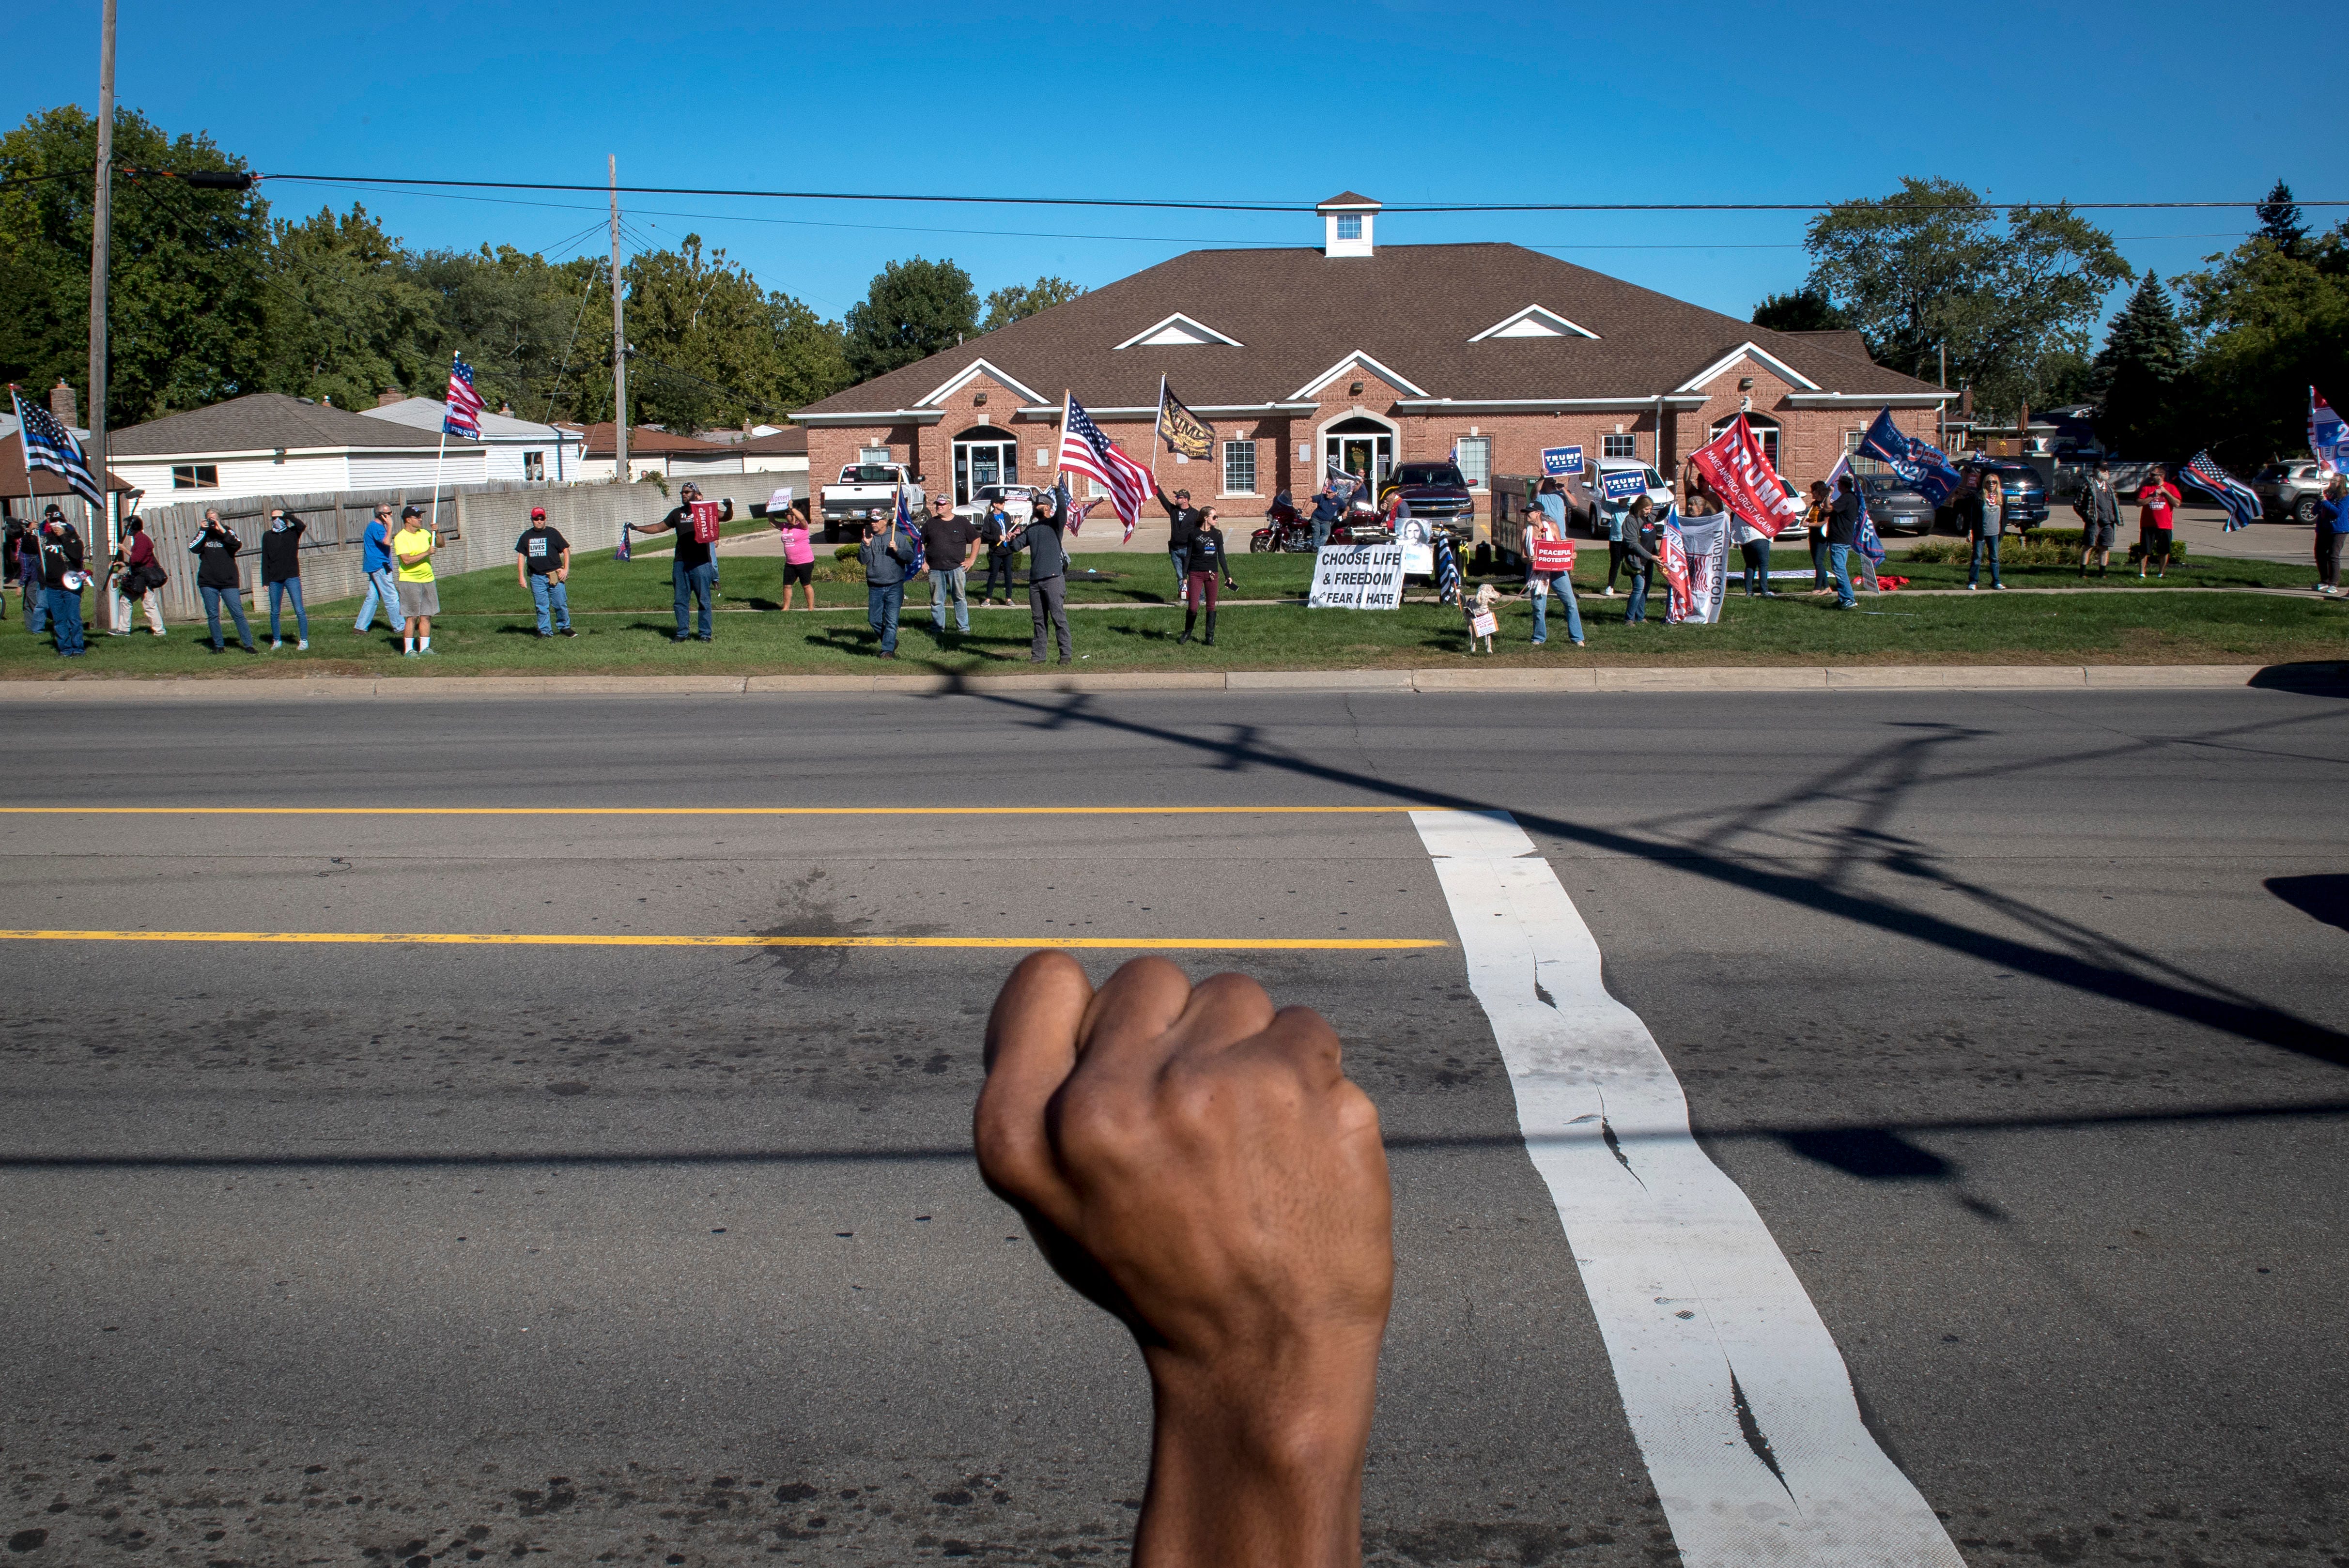 A Detroit Will Breathe protester raises their fist while Trump supporters counter protest before the March Against Racism in Warren on Sept. 19, 2020. The march in Warren occurred in response to the city called hate crimes against residents Candace Hall, her husband Eddie and their two children.